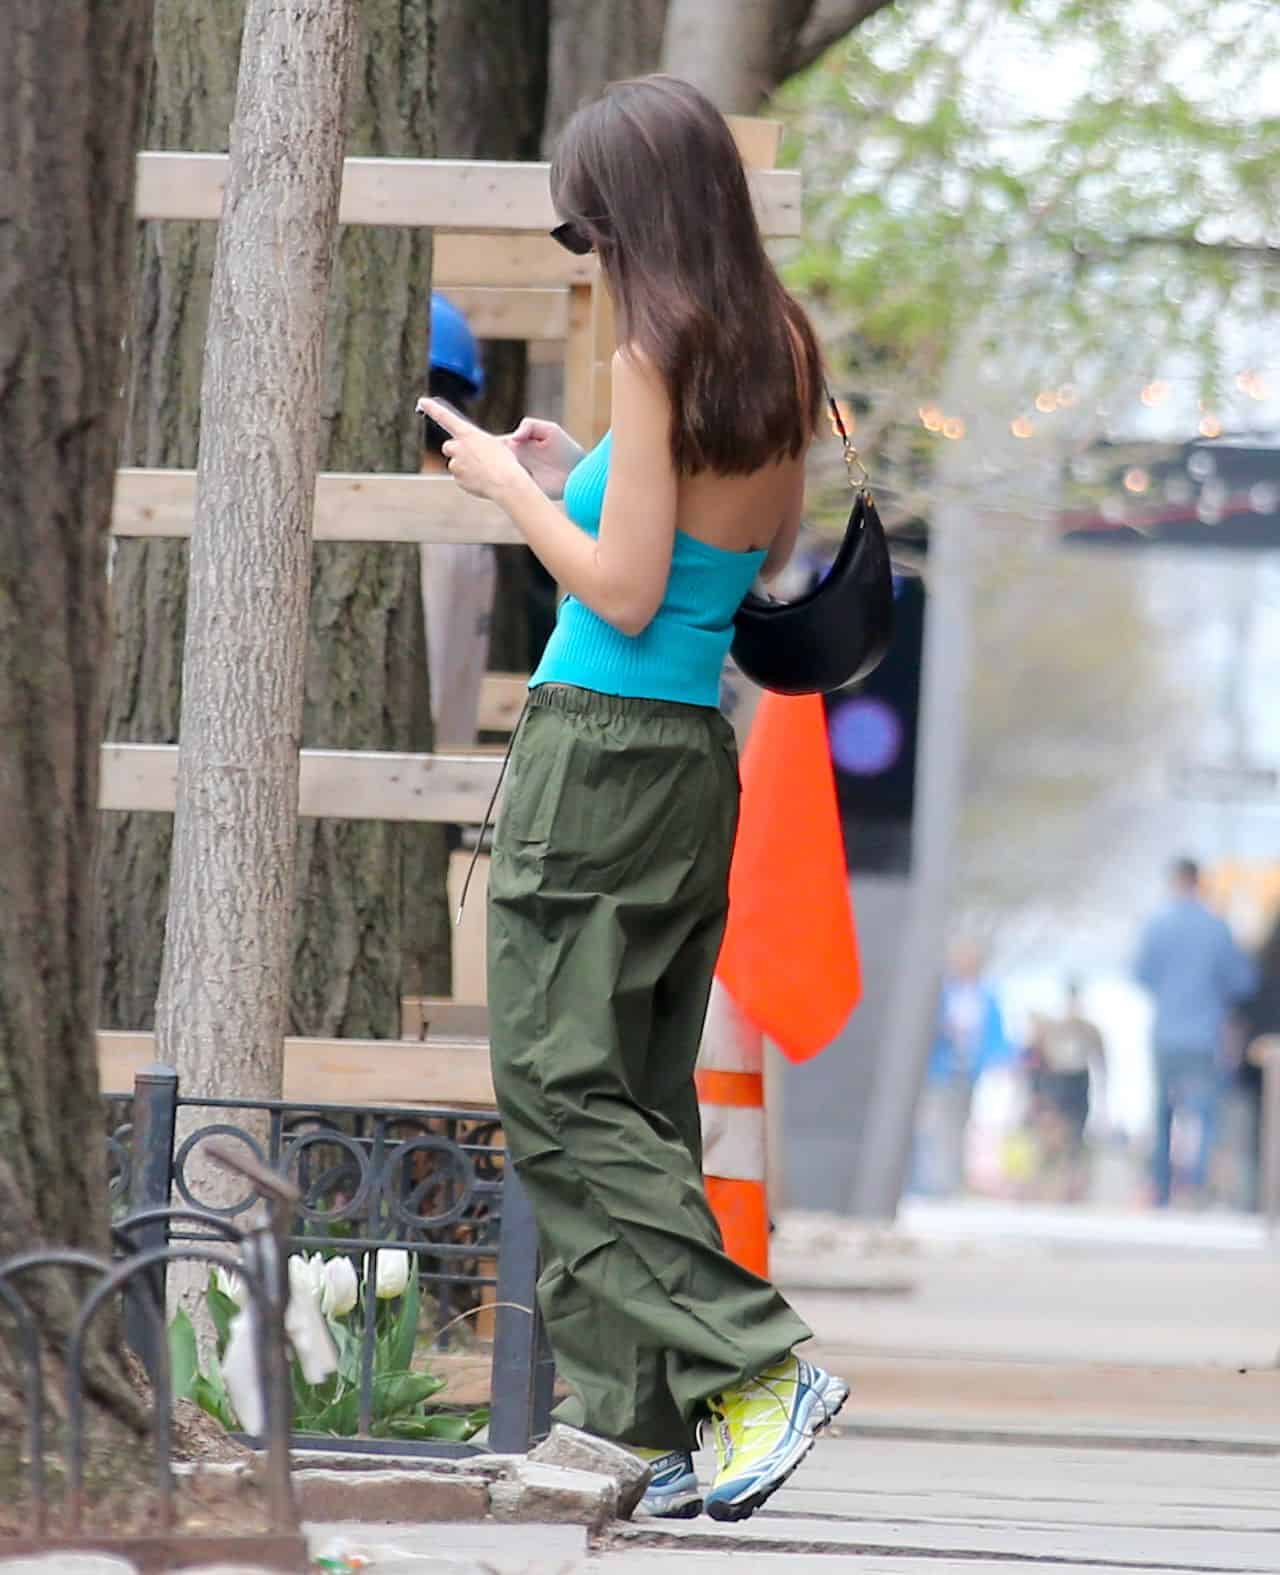 Emily Ratajkowski Shows Off Her Awesome Street Style in NYC